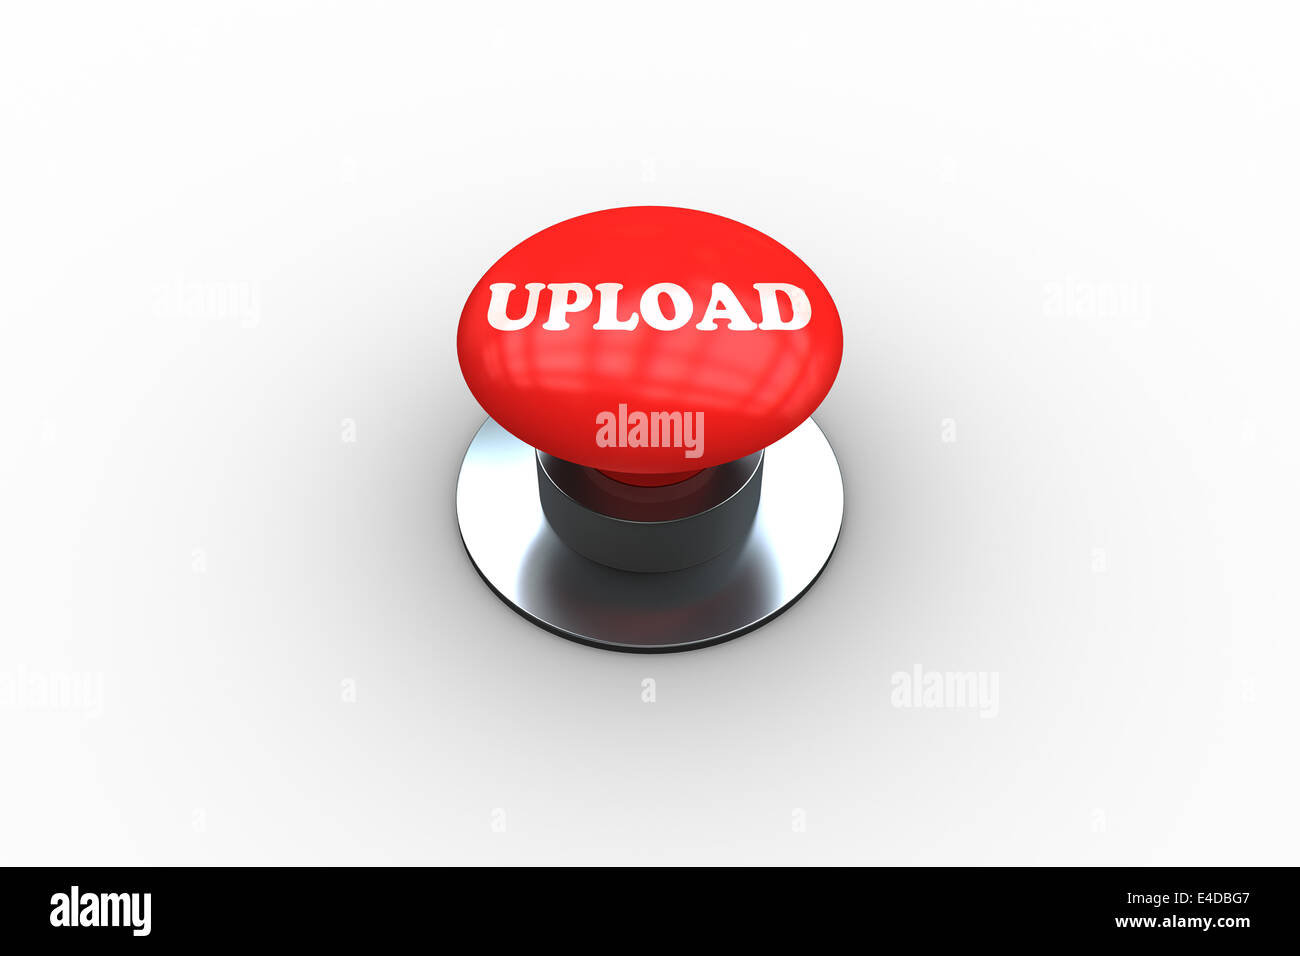 Upload on digitally generated red push button Stock Photo